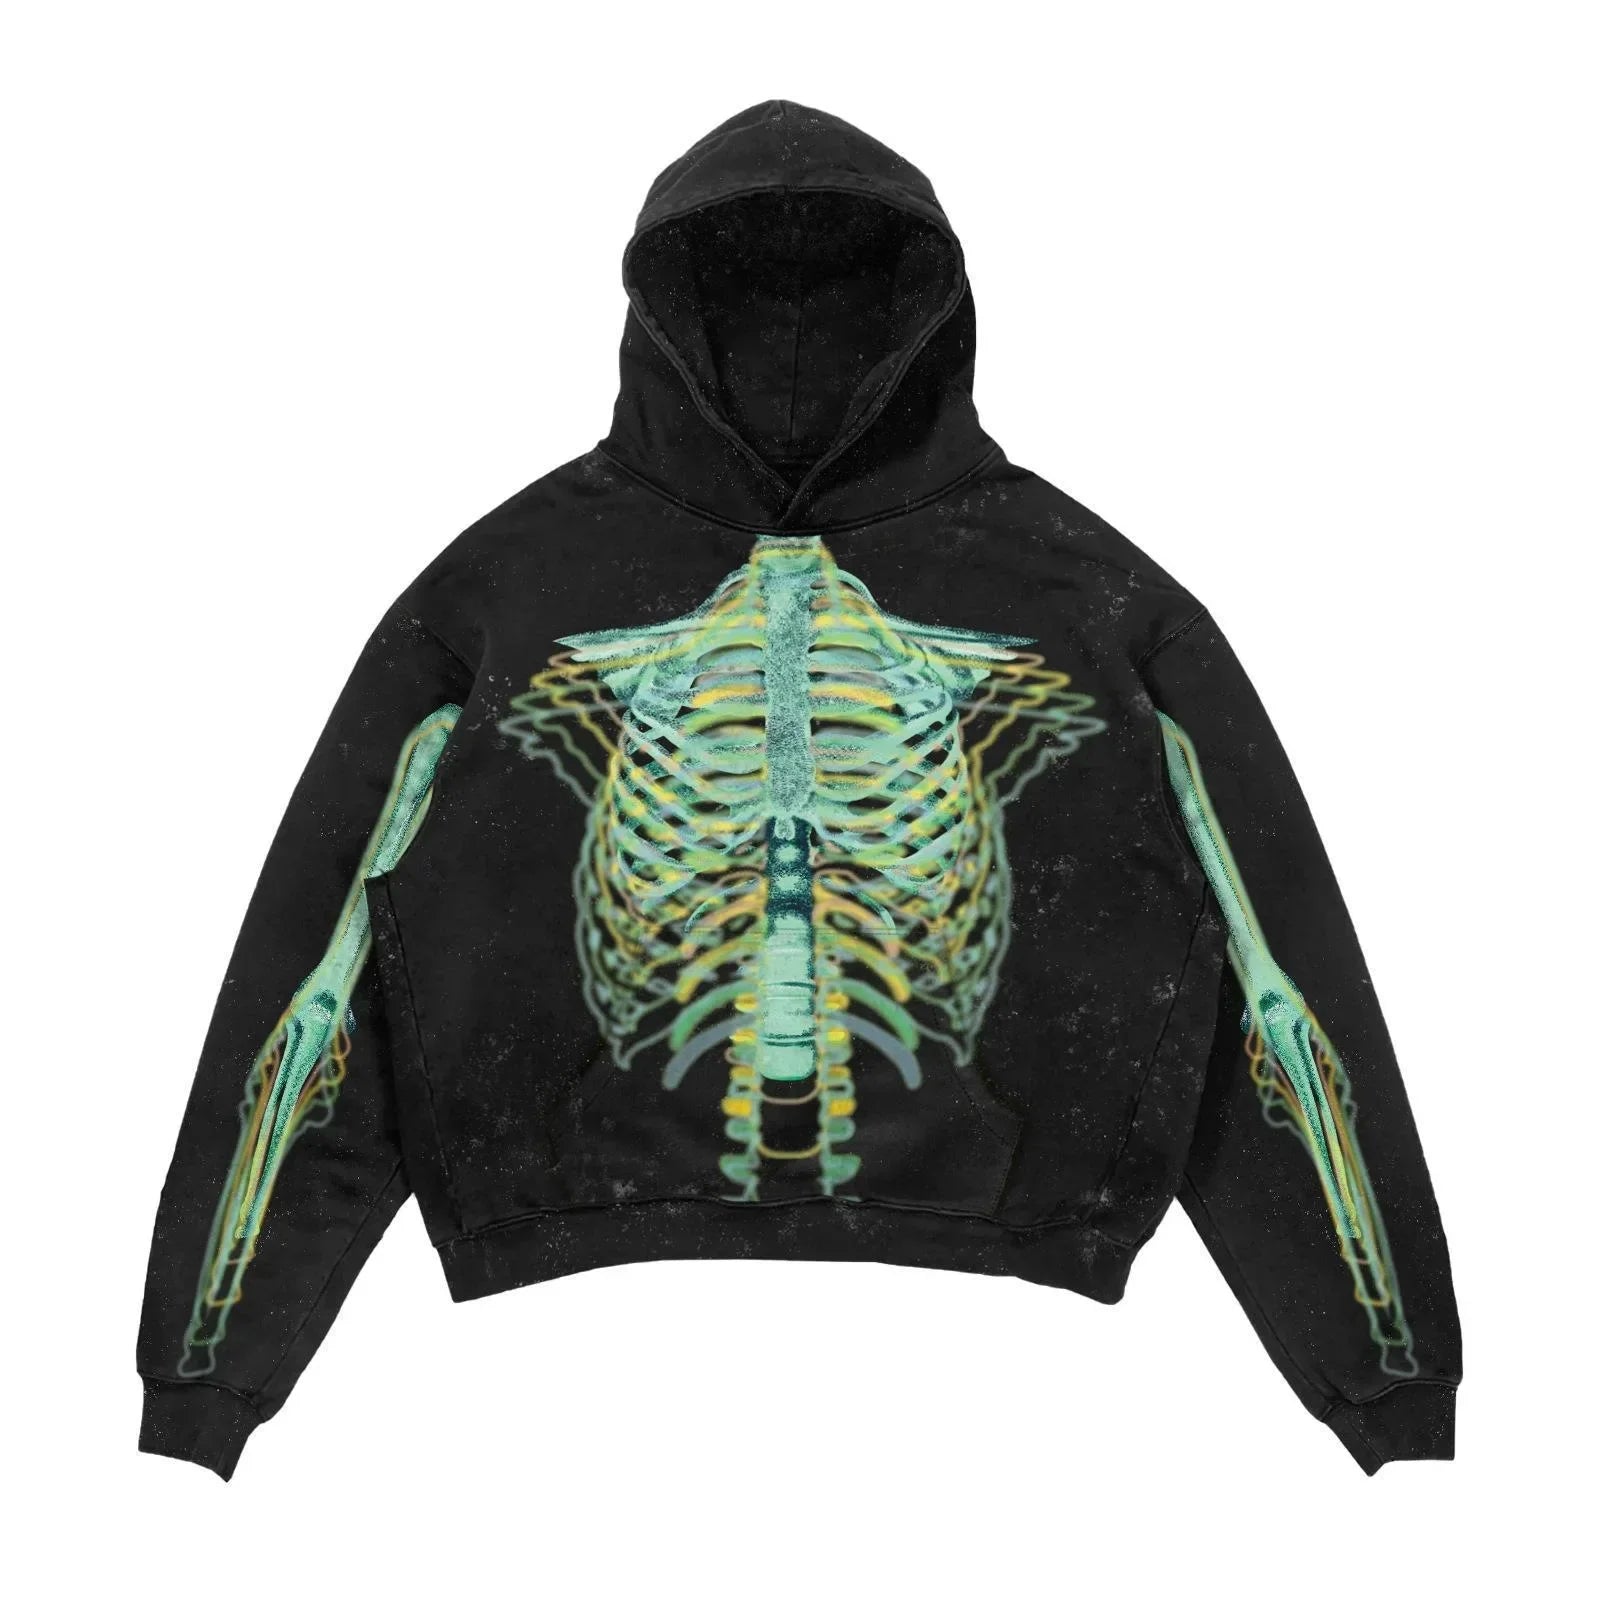 Explosions Printed Skull Y2K Retro Hooded Sweater Coat Street Style Gothic Casual Fashion Hooded Sweater Men's Female with a green skeletal ribcage and arm bone design on the front, perfect for those seeking a punk style hoodie. Made from durable polyester, this Maramalive™ men's hoodie combines comfort and edgy fashion effortlessly.